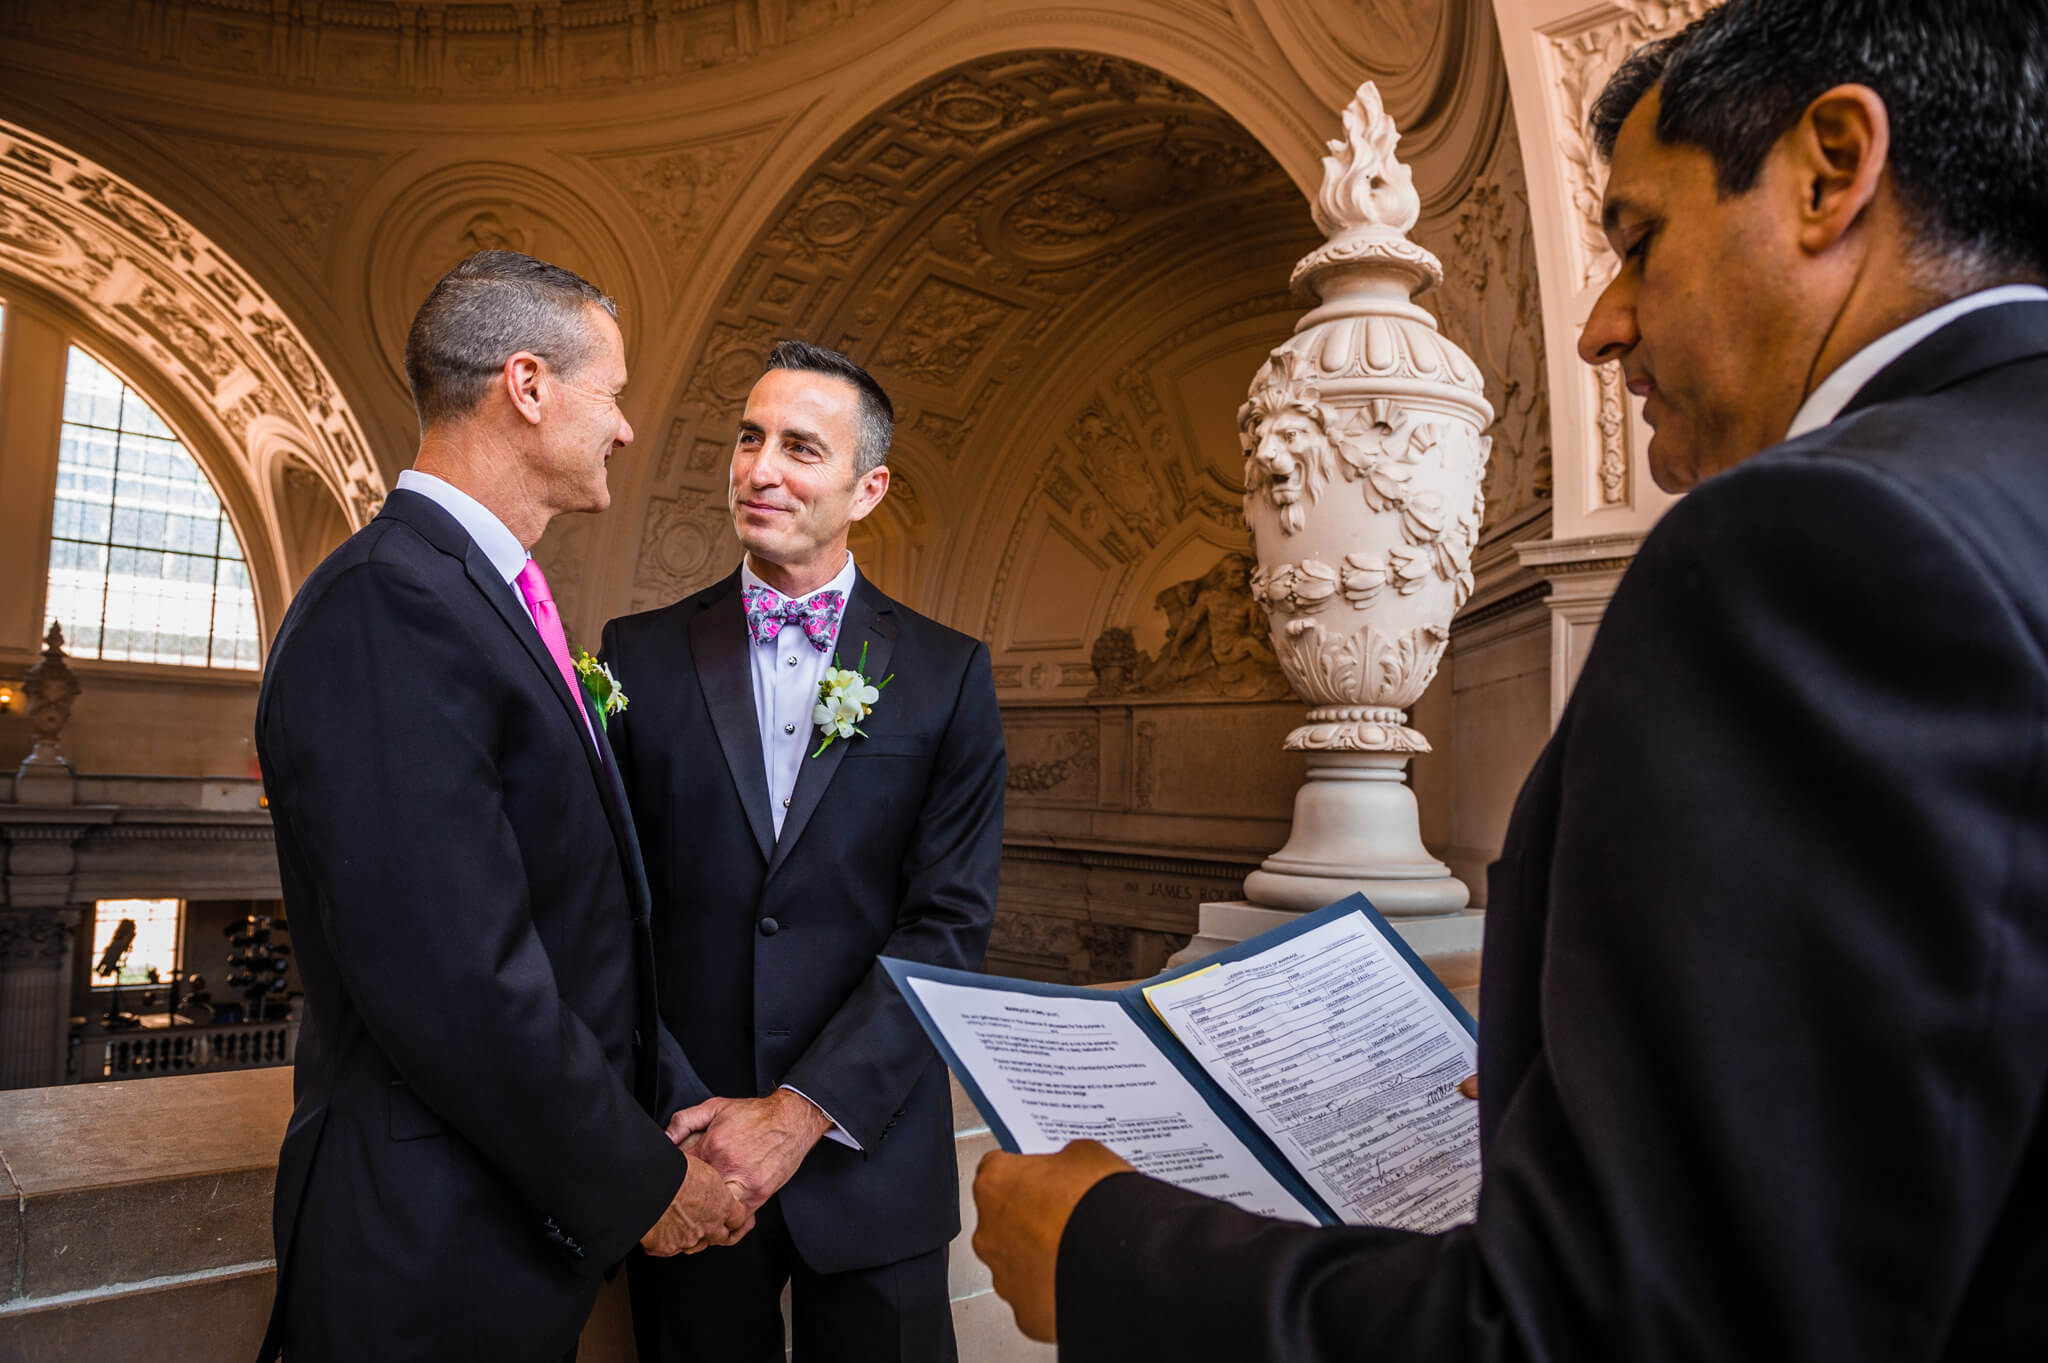 Two men stand together at the altar as wedding is officiated at San Francisco City Hall